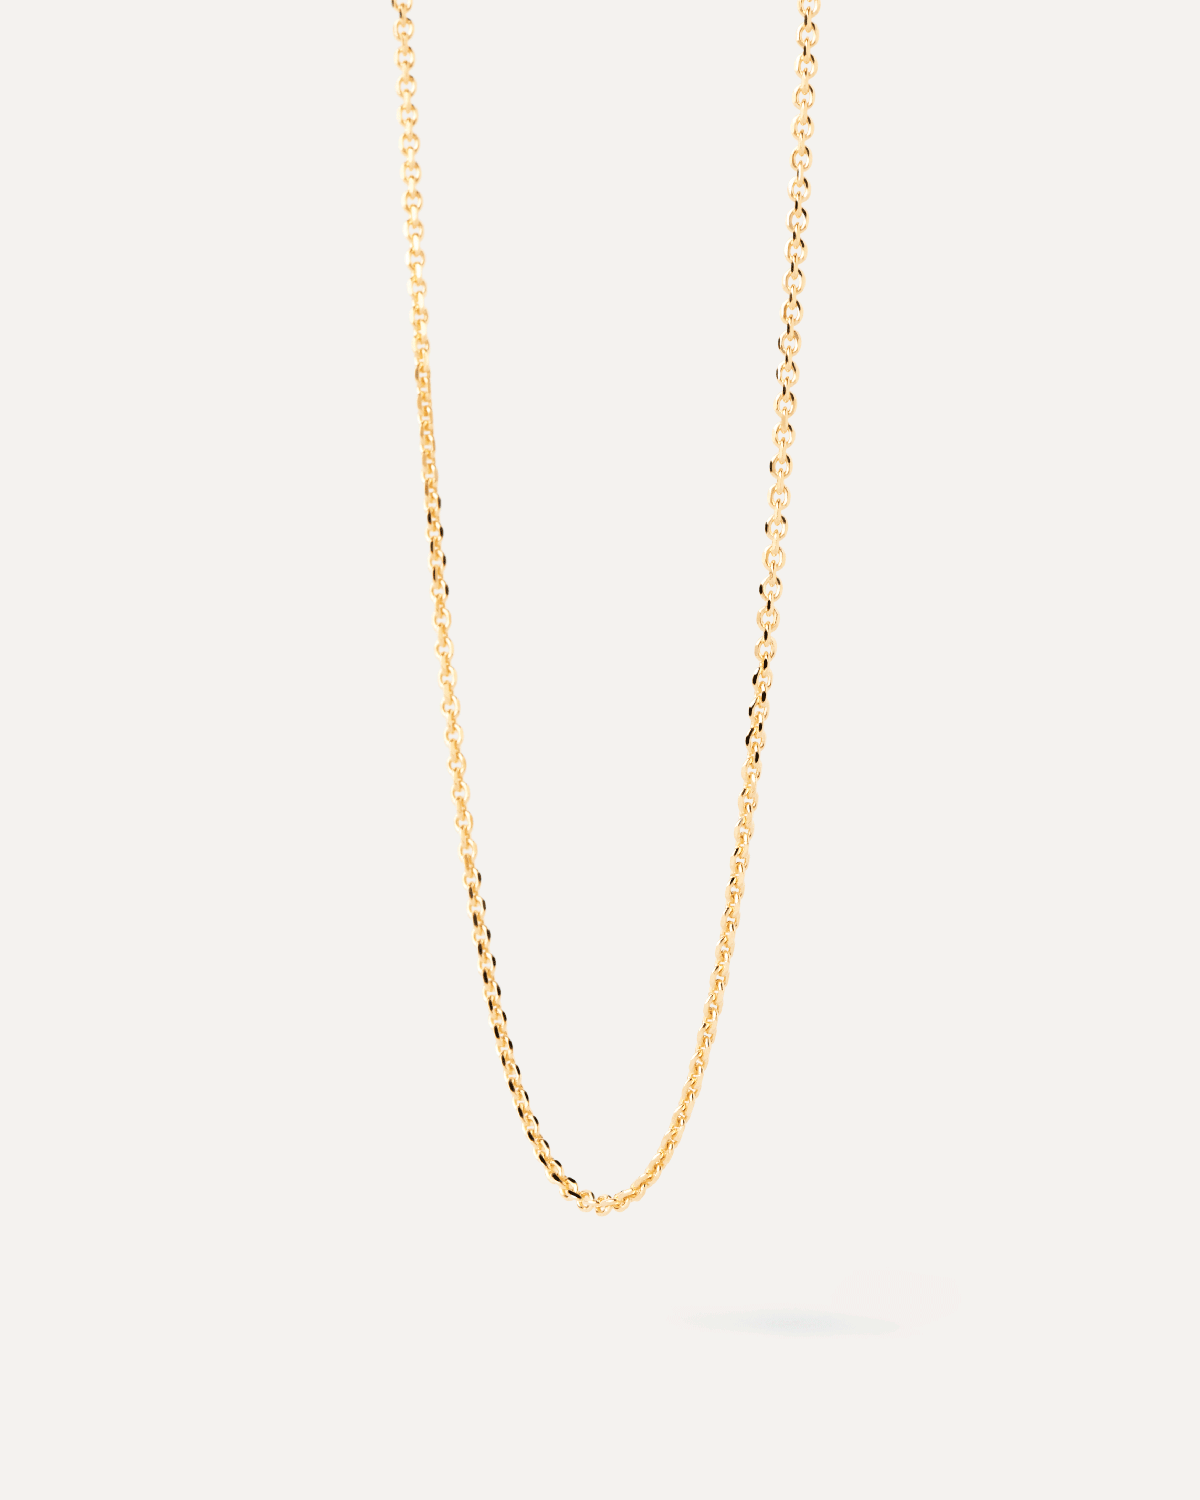 2024 Selection | Essential chain necklace. Get the latest arrival from PDPAOLA. Place your order safely and get this Best Seller. Free Shipping.